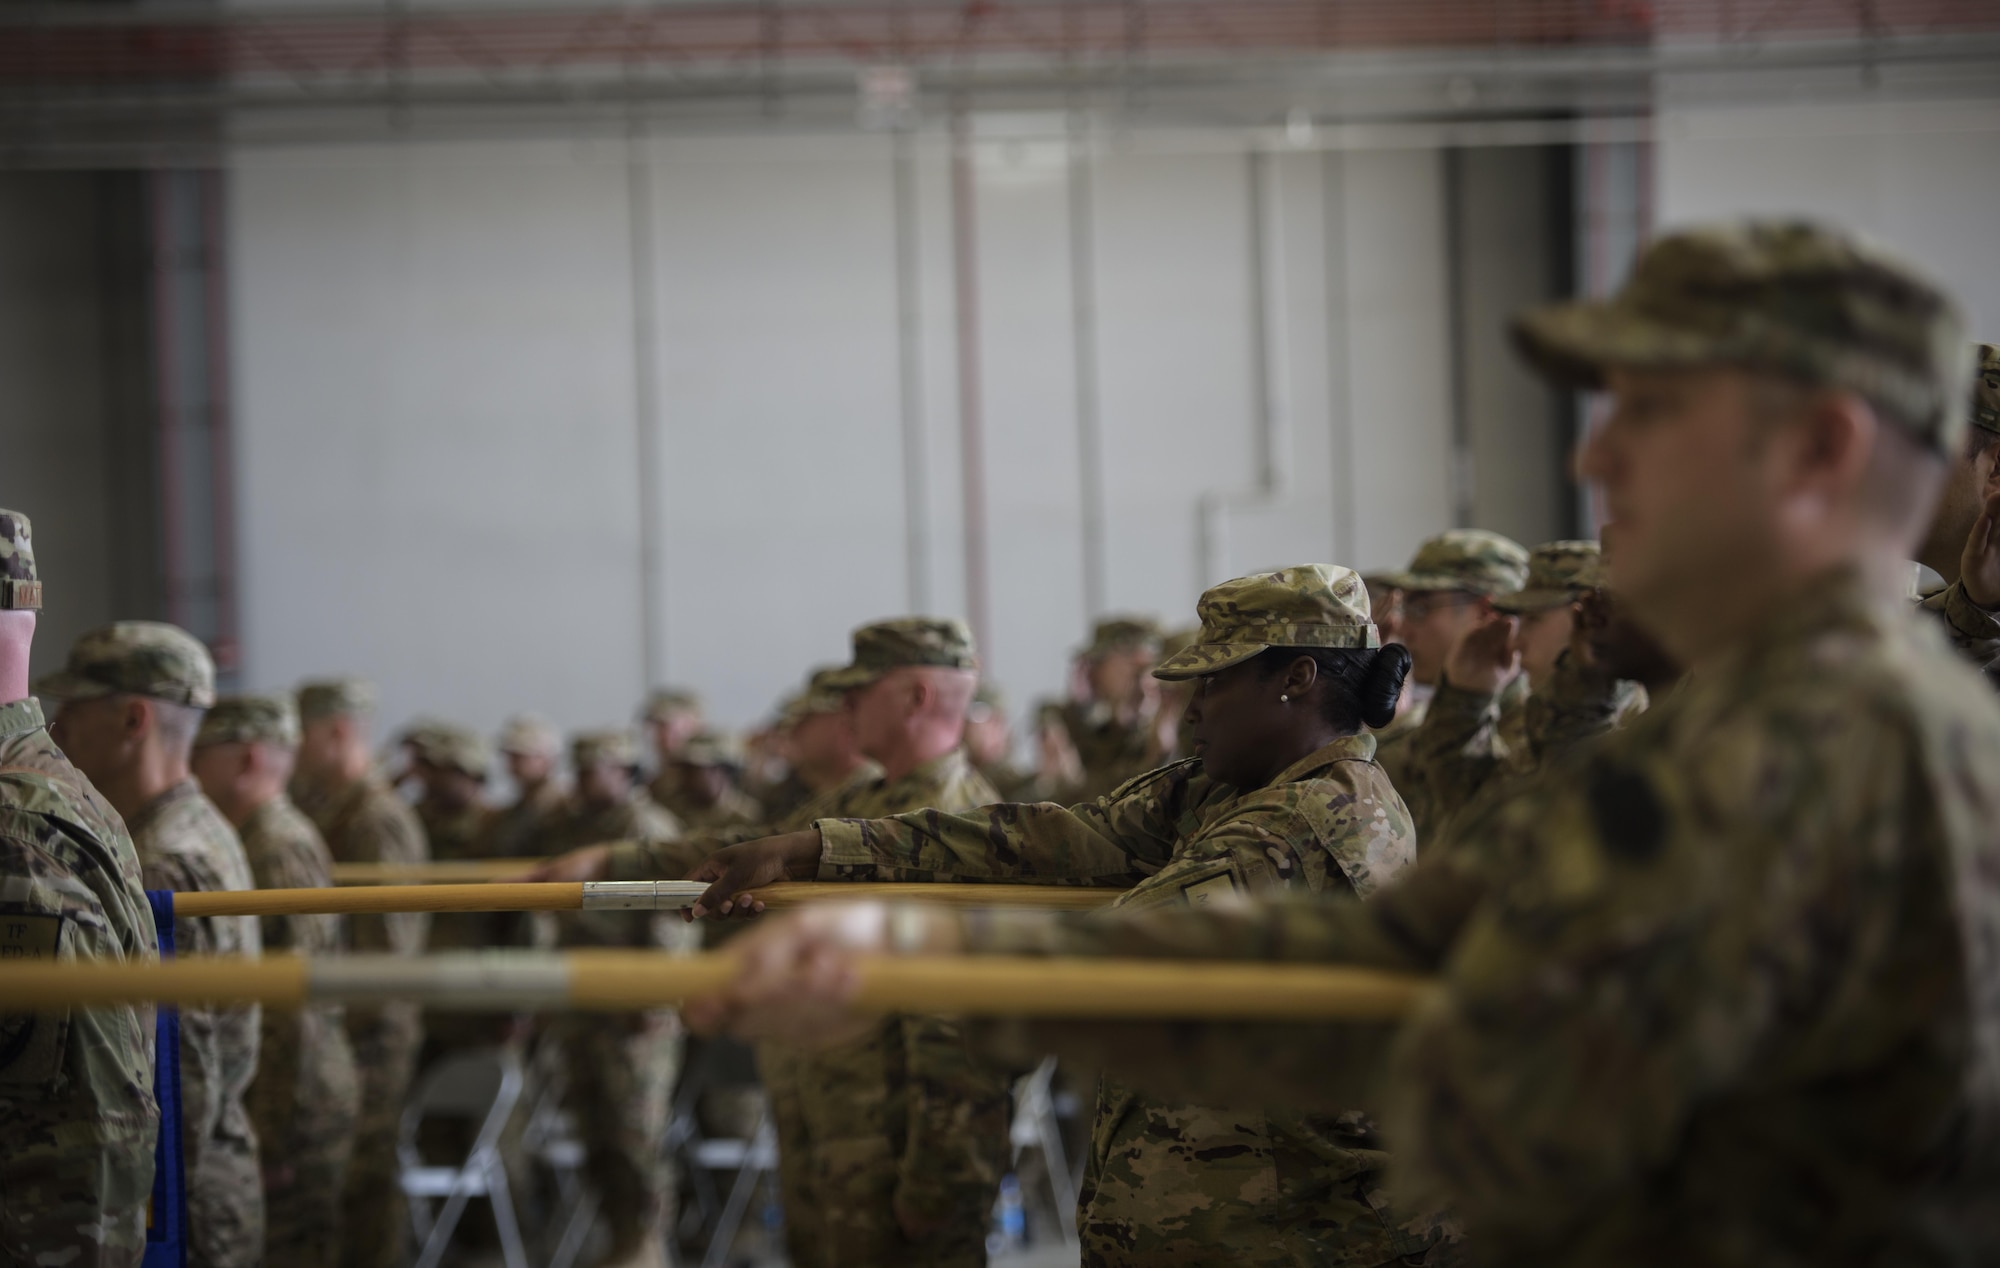 Airmen from the 455th Air Expeditionary Wing lower their group guidons as the national anthem is sung during a change of command ceremony at Bagram Airfield, Afghanistan, June 3, 2017. During the ceremony, Brig. Gen. Jim Sears relinquished command of the 455th AEW to Brig. Gen. Craig Baker. (U.S. Air Force photo by Staff Sgt. Benjamin Gonsier)